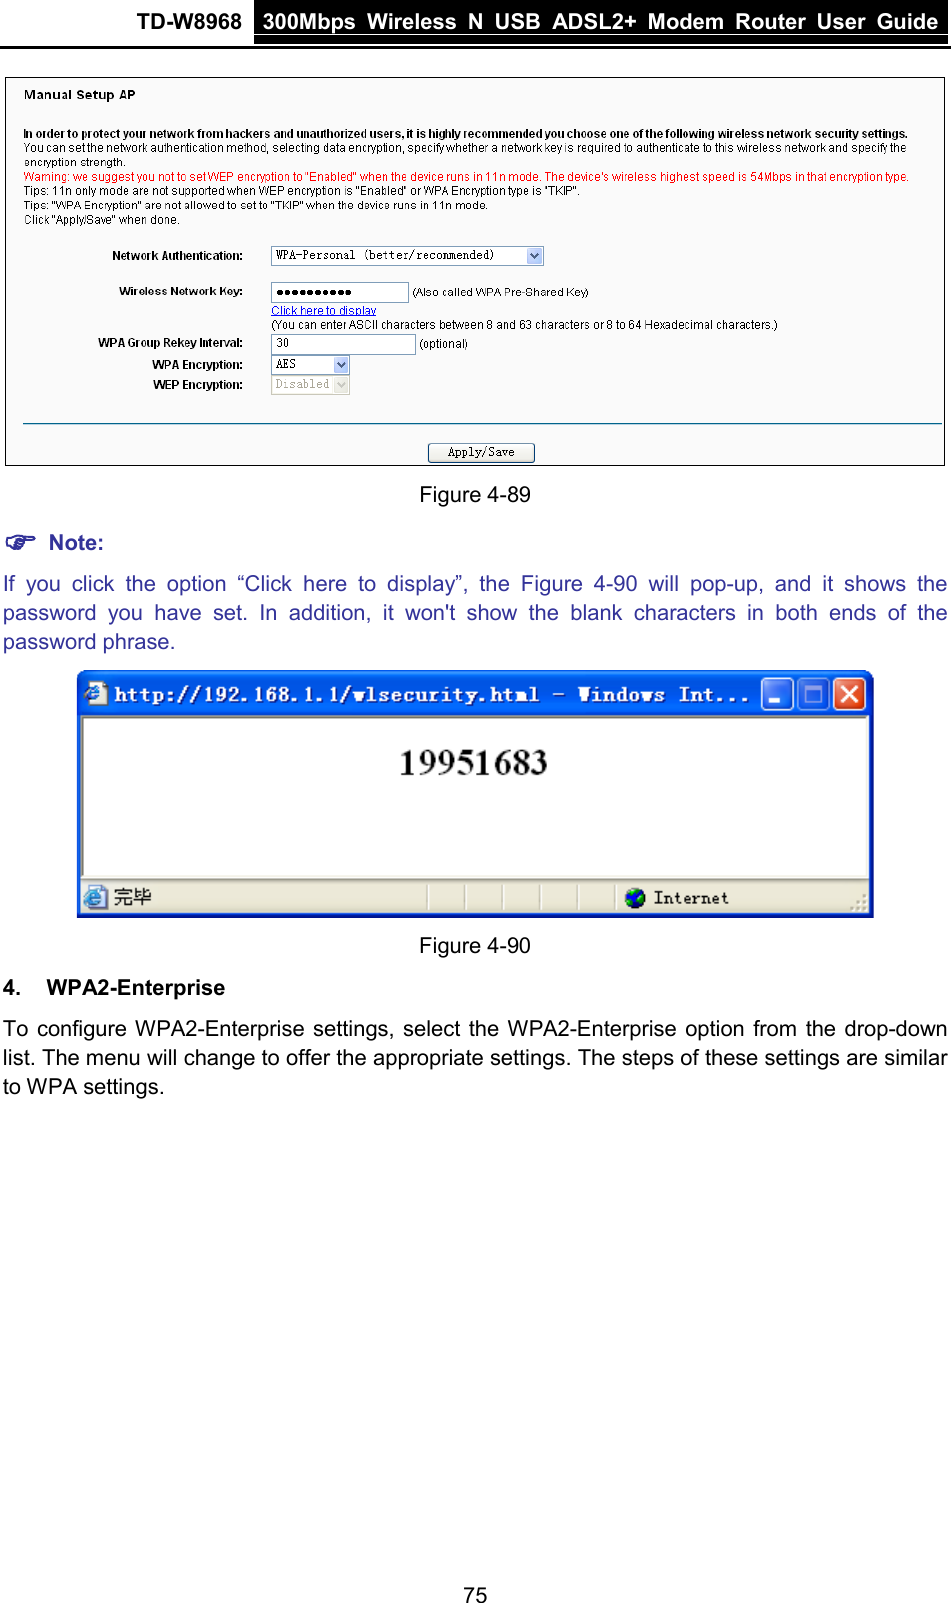 TD-W8968 300Mbps Wireless  N  USB ADSL2+ Modem Router  User Guide   Figure 4-89  Note: If you click the option “Click  here to display”,  the  Figure  4-90 will pop-up,  and it shows the password you have set. In addition, it won&apos;t show the blank characters in both ends of the password phrase.  Figure 4-90 4. WPA2-Enterprise To configure WPA2-Enterprise settings, select the WPA2-Enterprise option from the drop-down list. The menu will change to offer the appropriate settings. The steps of these settings are similar to WPA settings. 75 